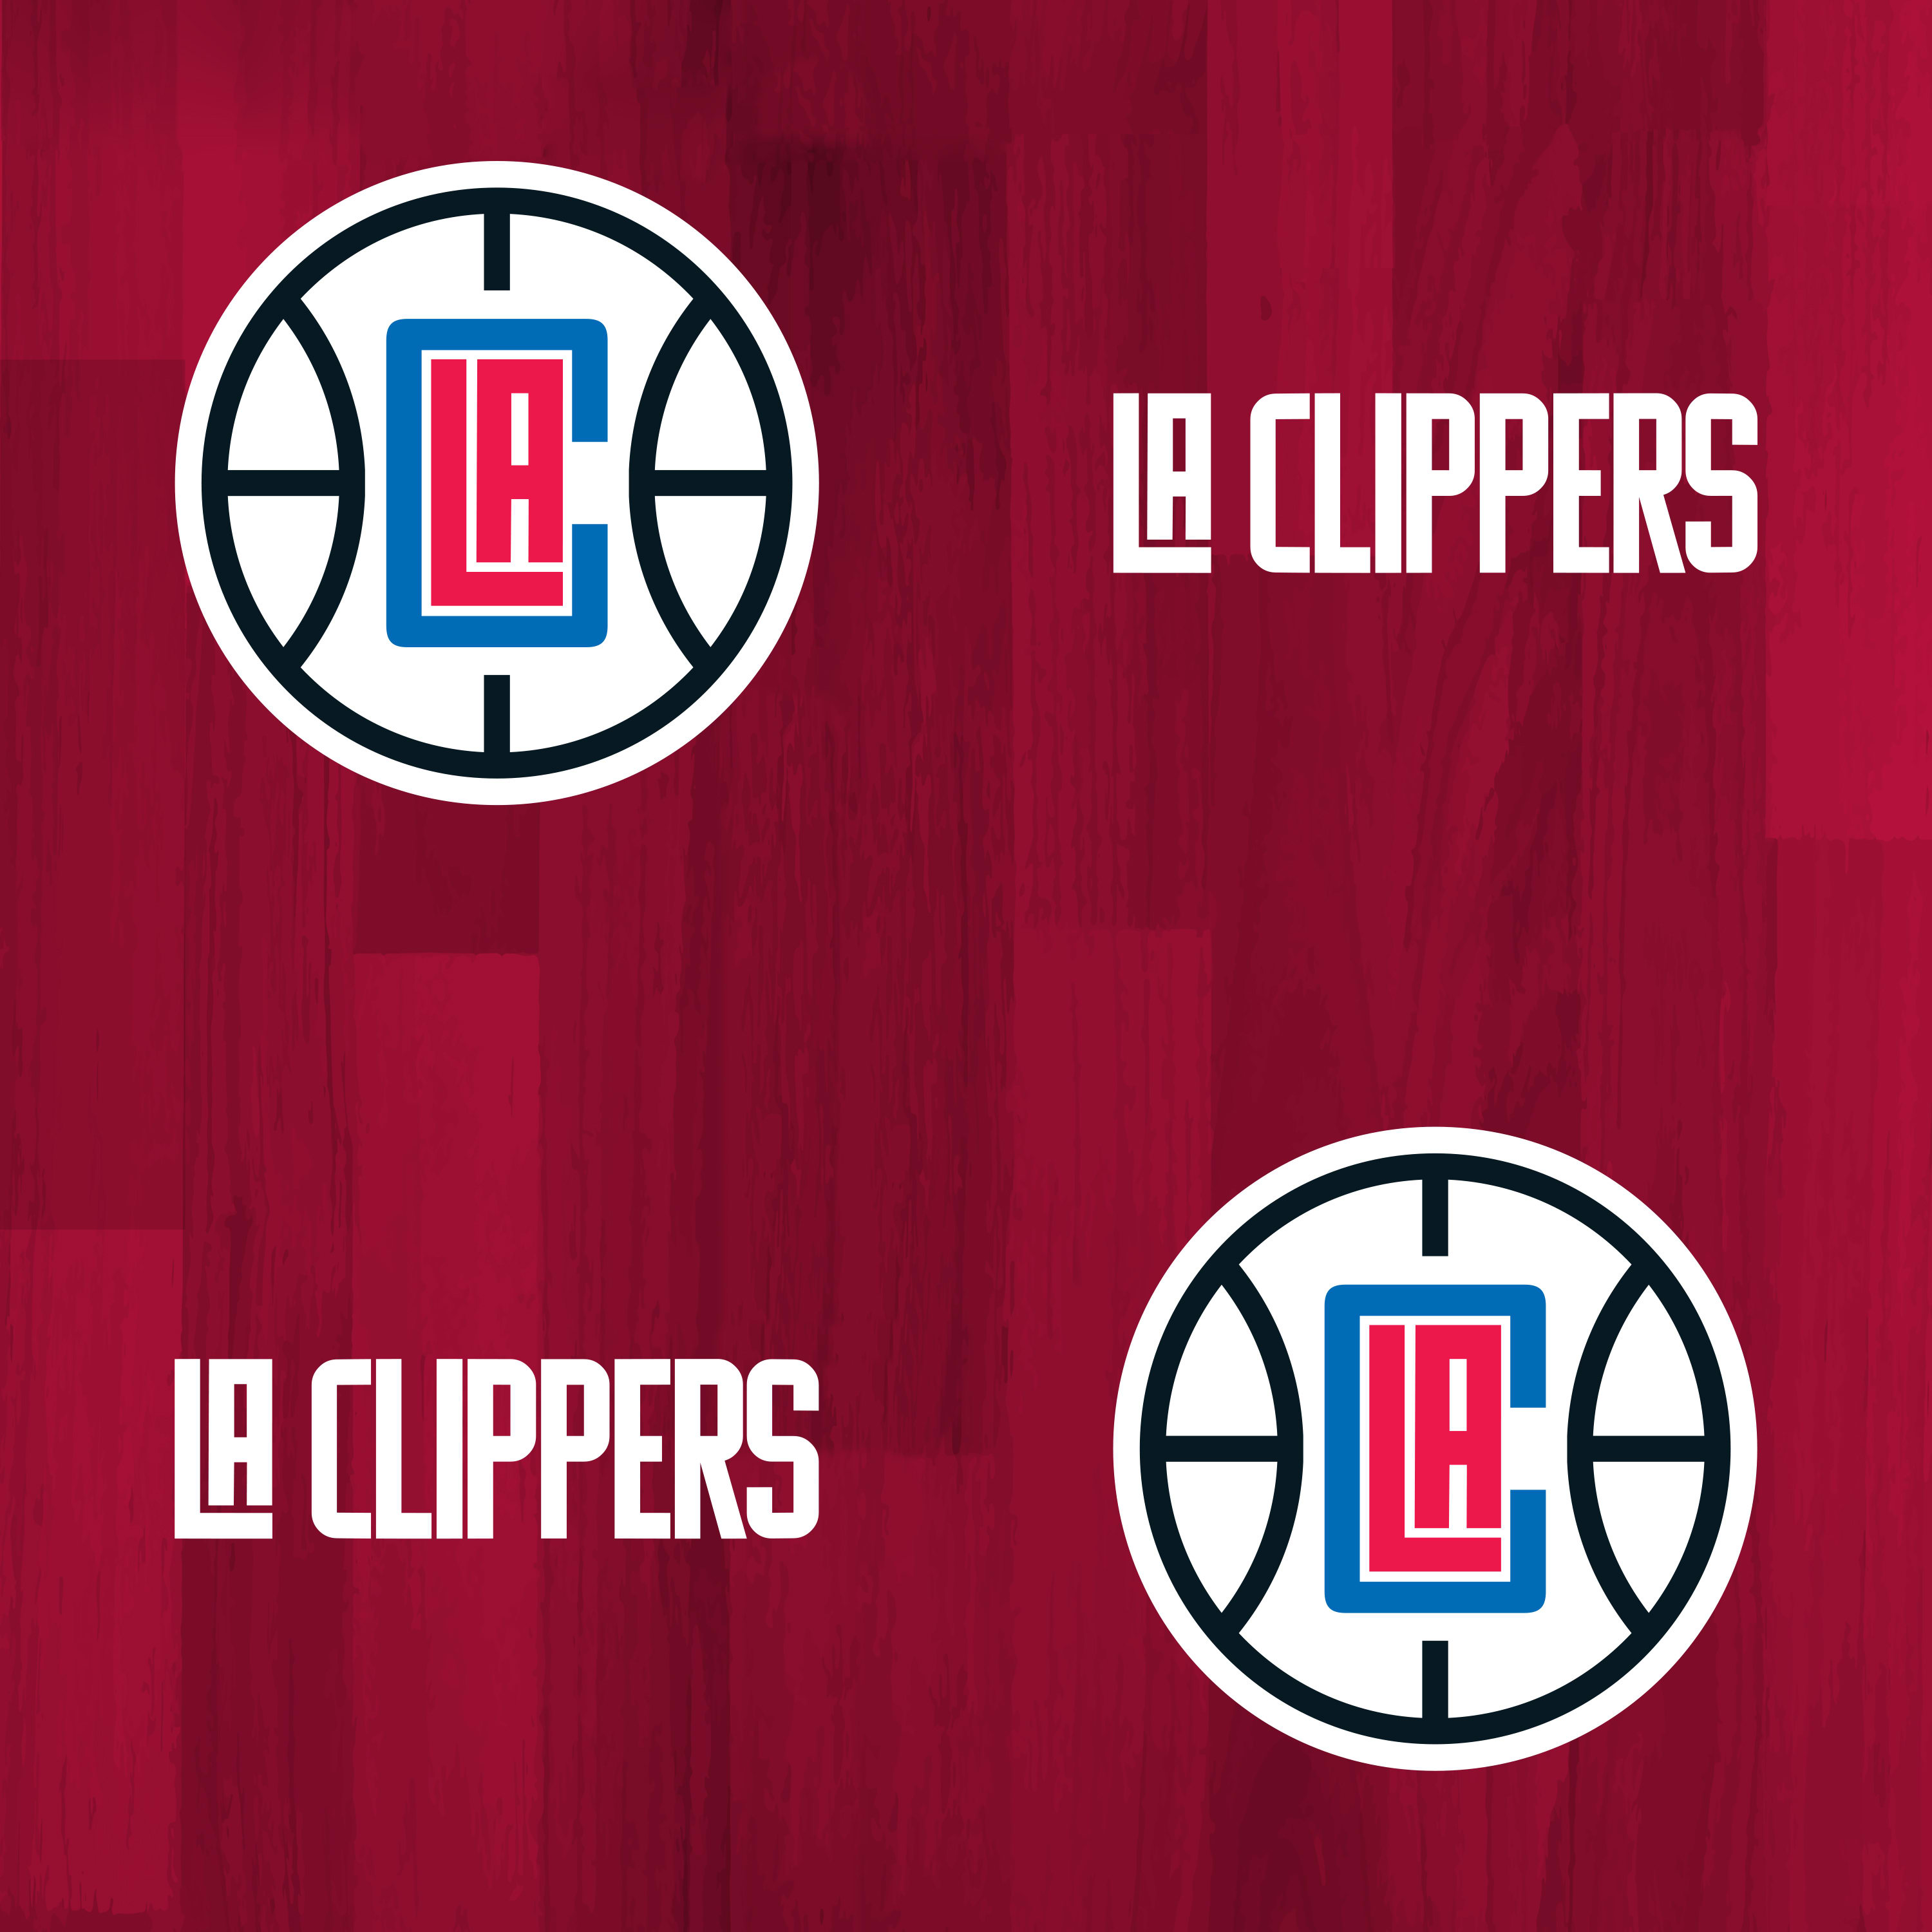 clippers wallpaper,logo,red,font,text,banner